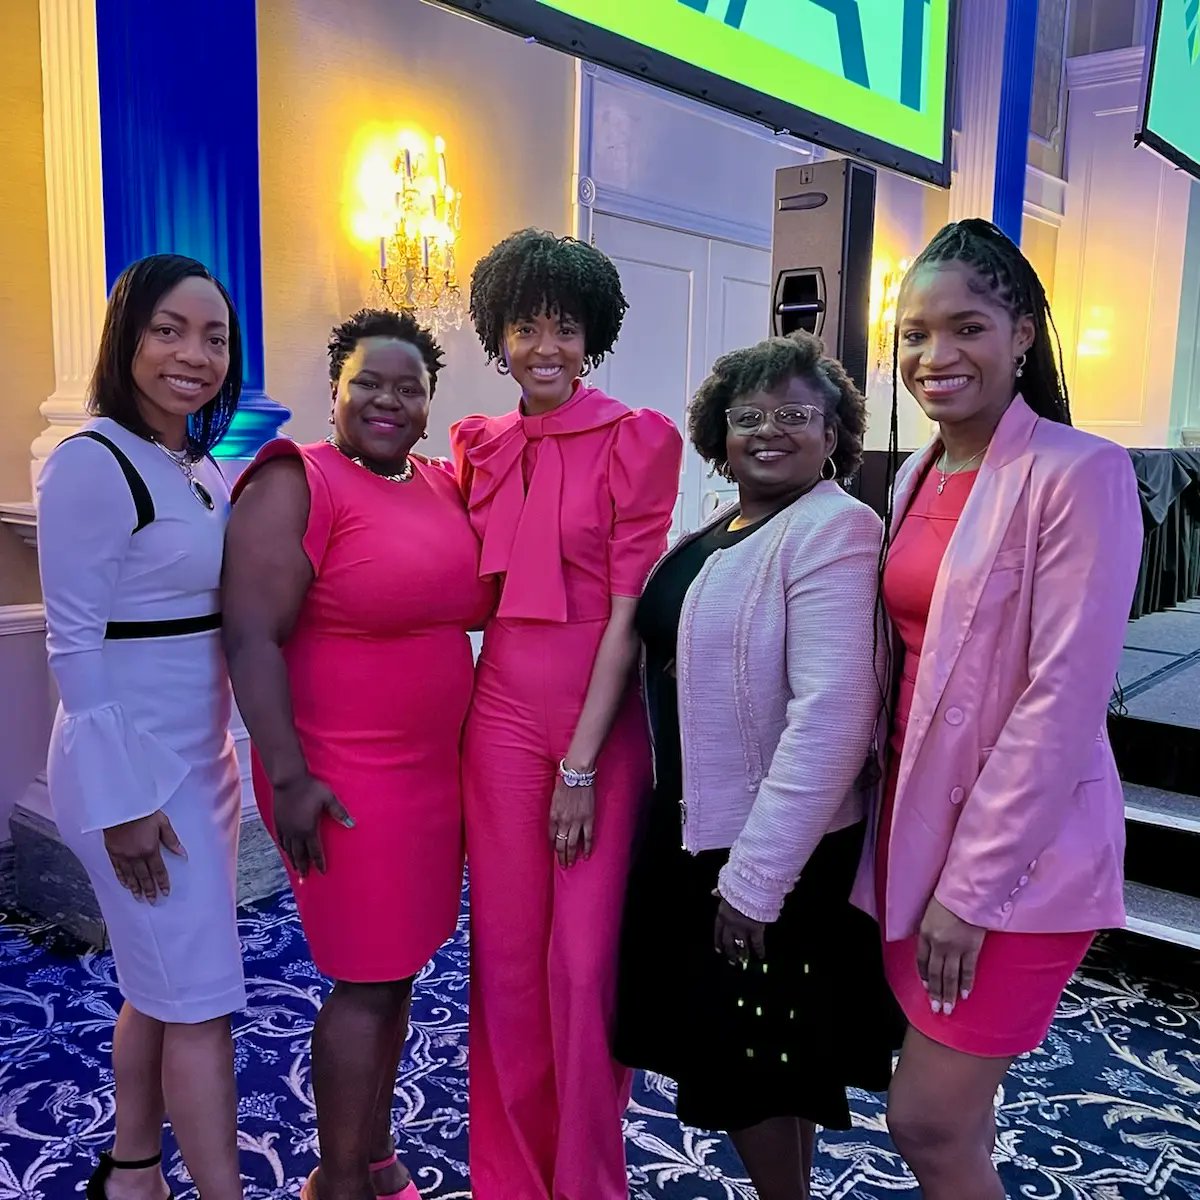 To all of the illustrious honorees at the Executive Women of New Jersey's Salute to the Policy Makers Gala, I'm humbled and dared by your leadership. And to my interim CEO, Mary Maples, you inspire me to excel and aspire to follow in the path that you dare!

#WhenWomenLead